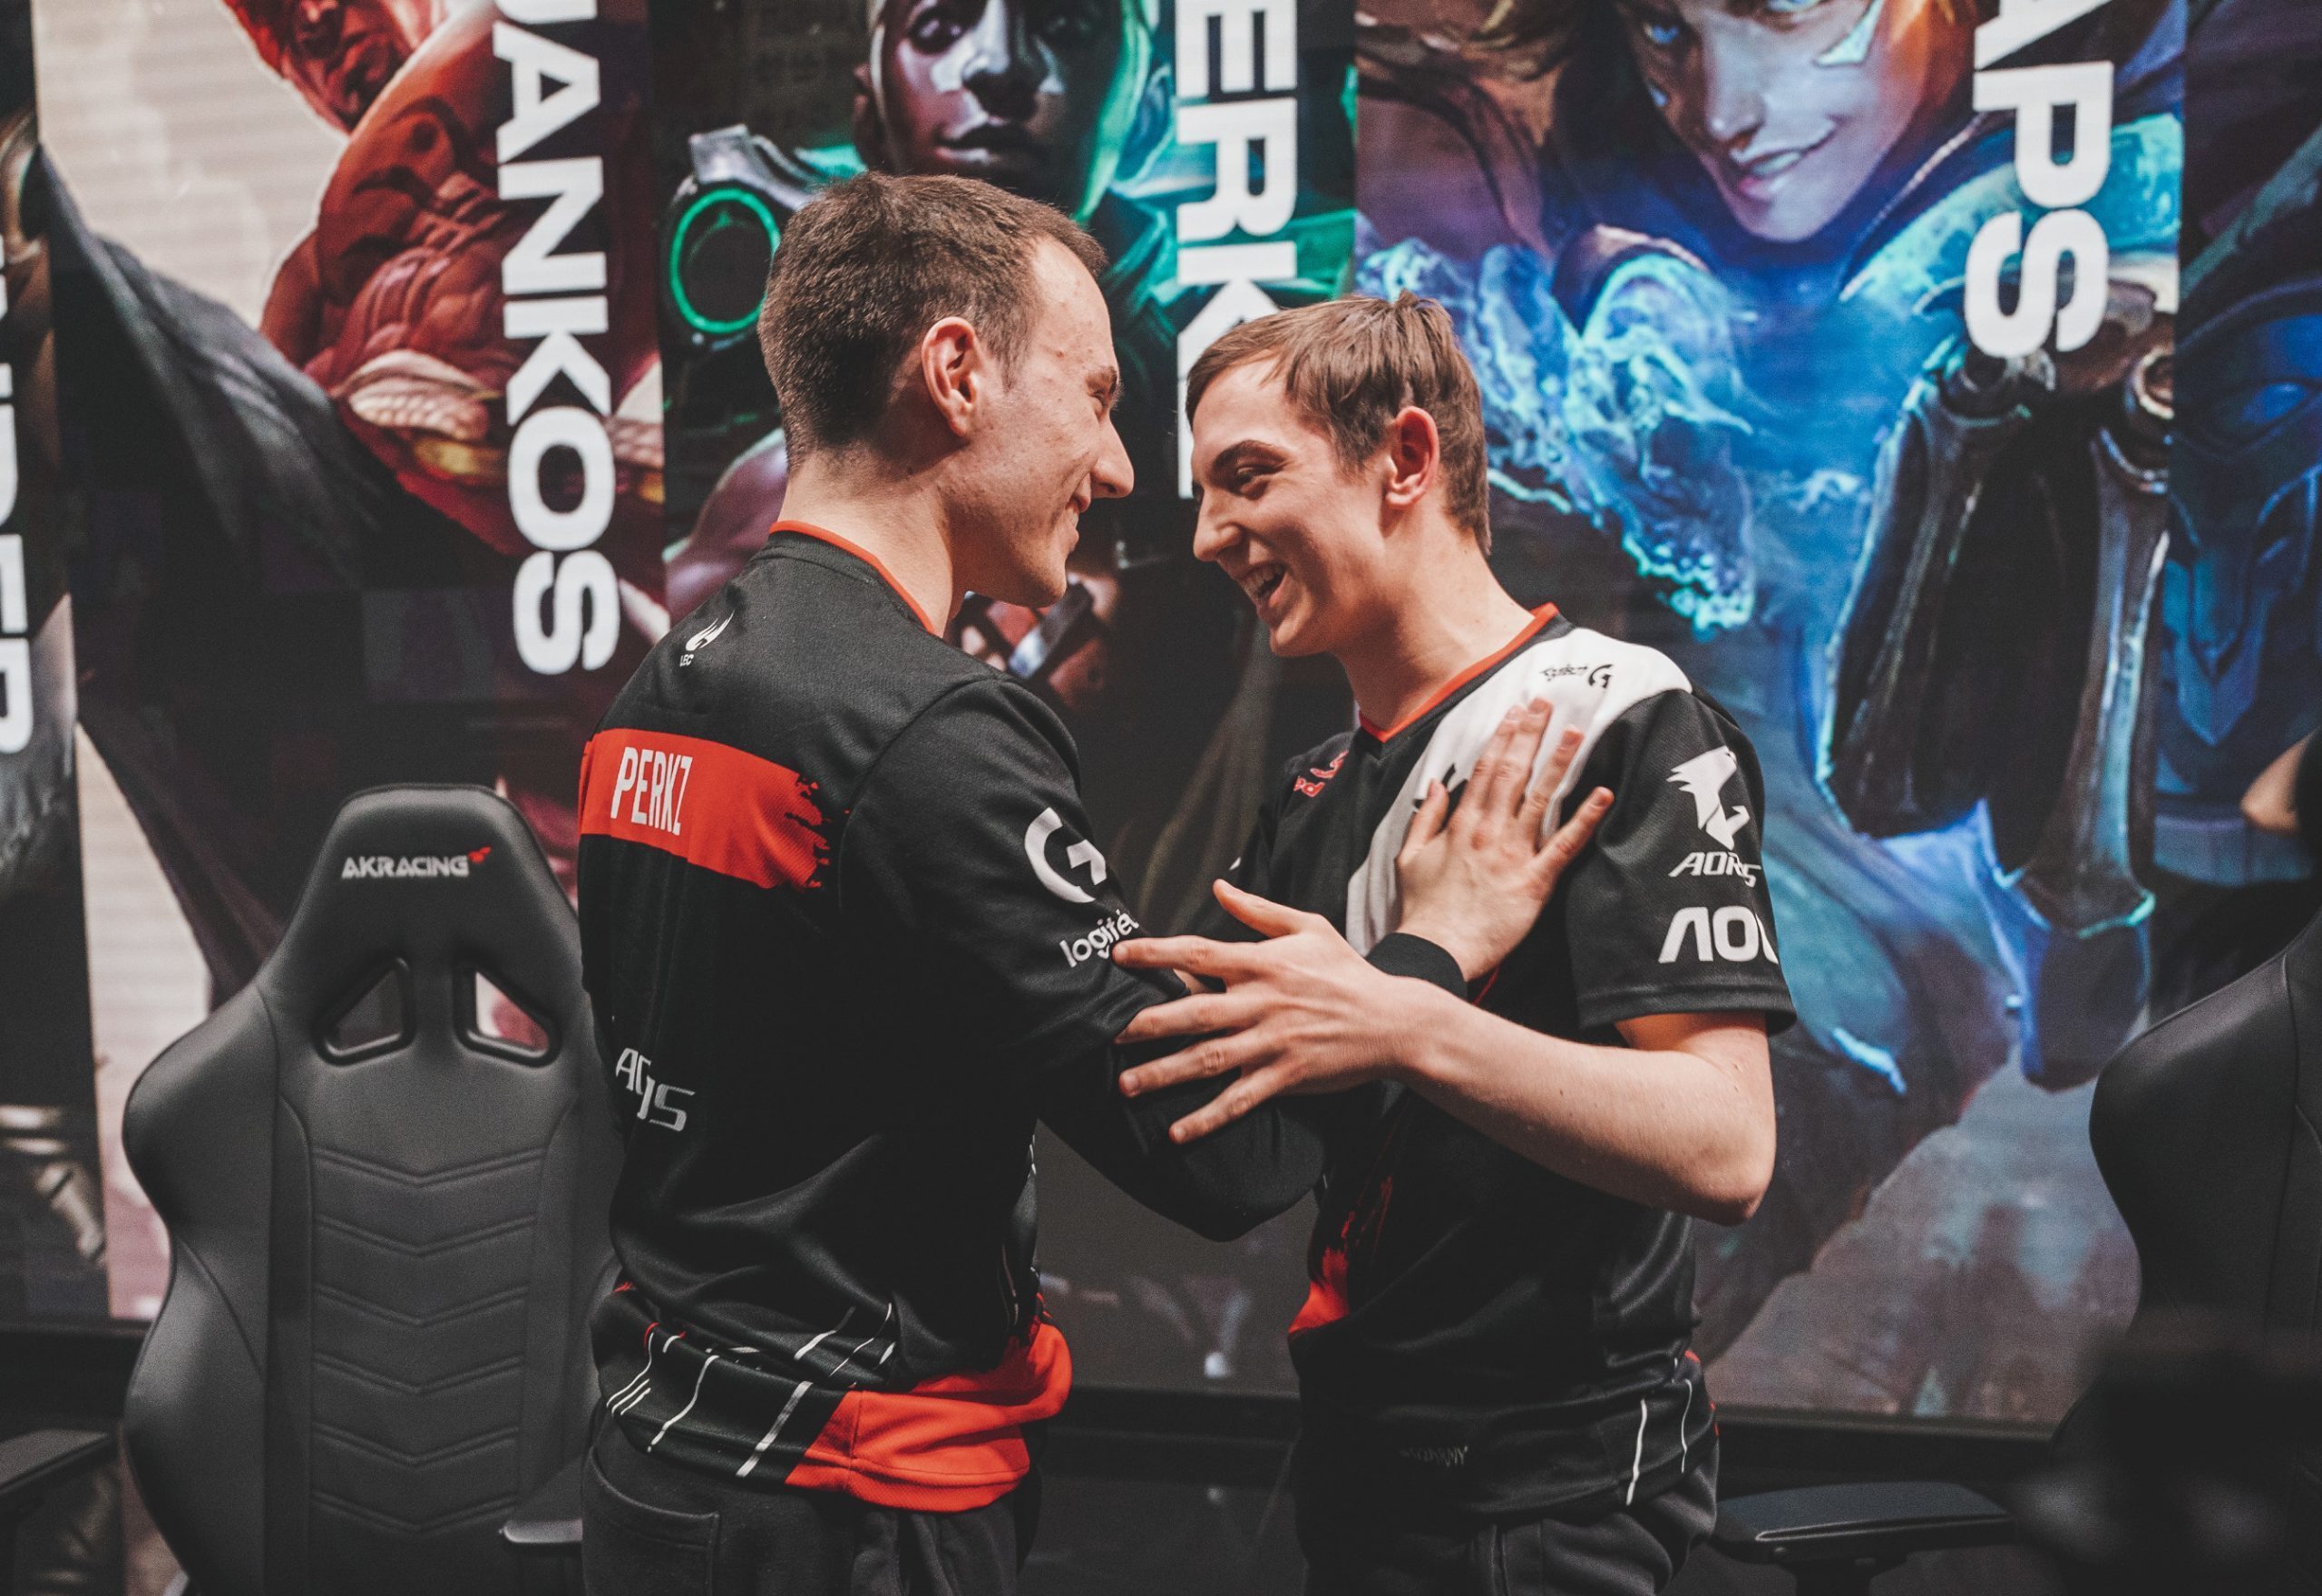 Caps and Perkz aim for nothing less than a World Championship title (Photo via Michal Konkol for Riot Games)